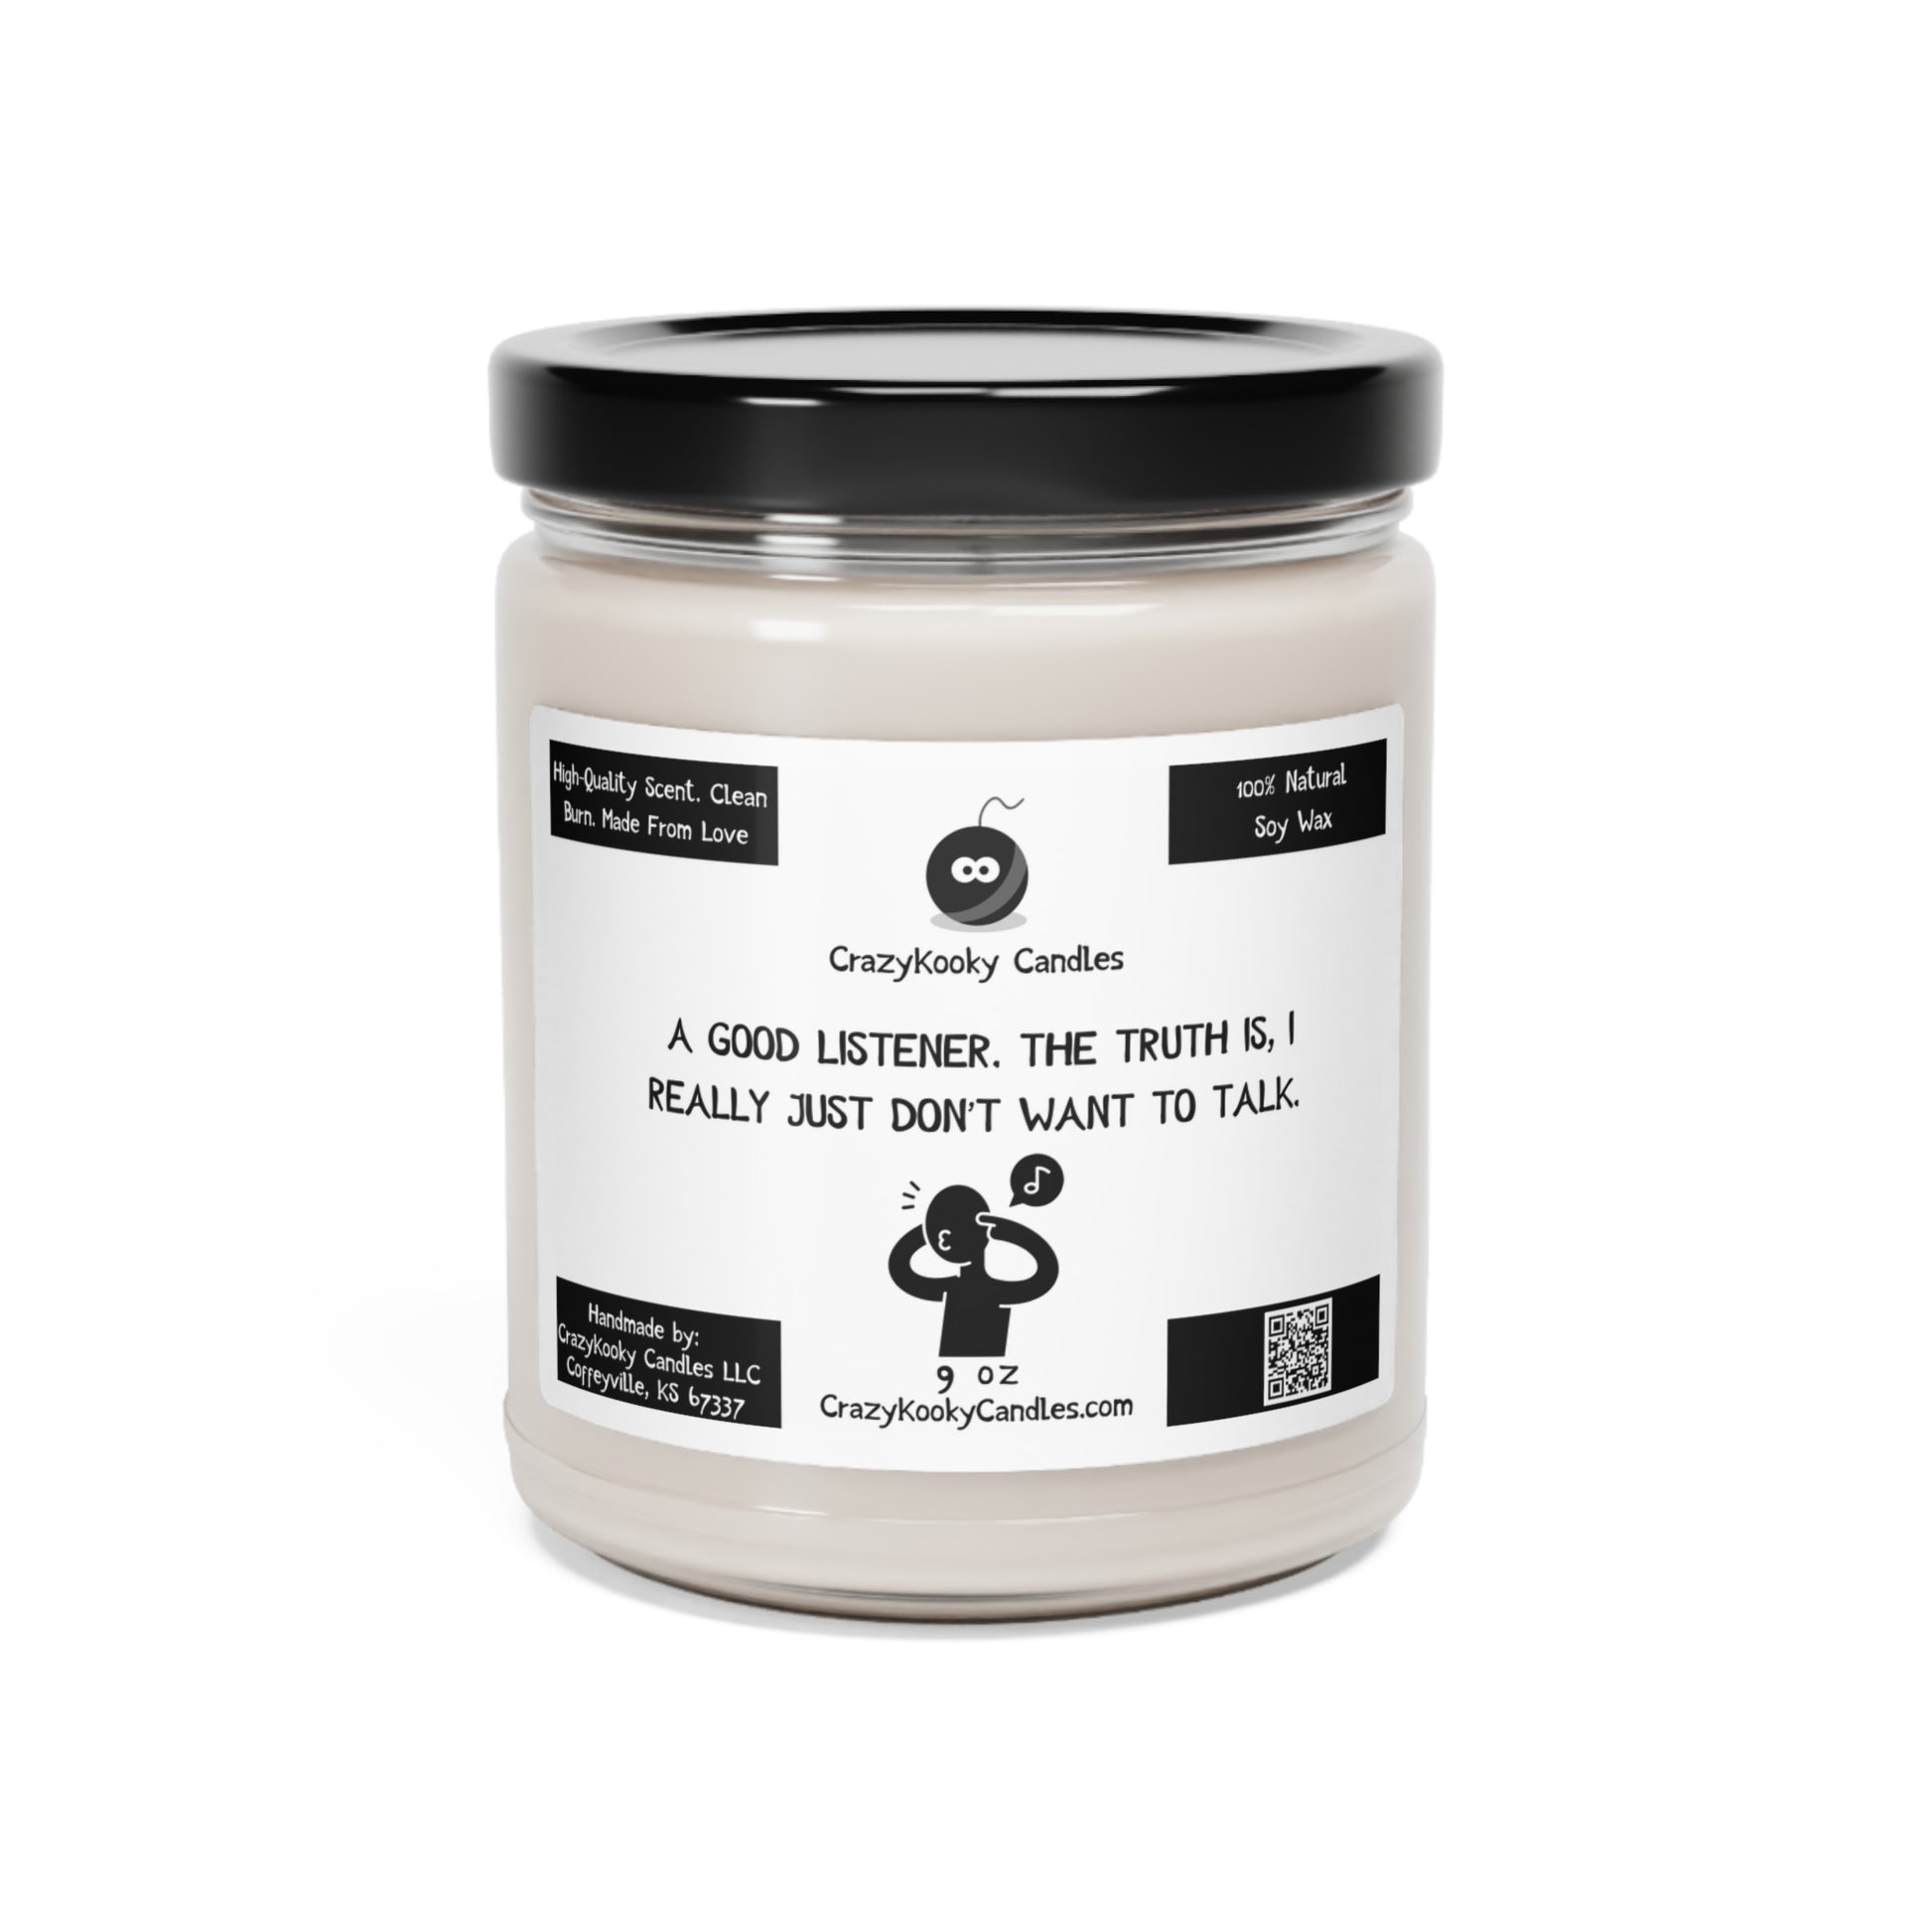 A GOOD LISTENER. THE TRUTH IS, I REALLY JUST DON'T WANT TO TALK - Funny Candle, Scented Soy Candle, 9oz - CrazyKooky Candles LLC